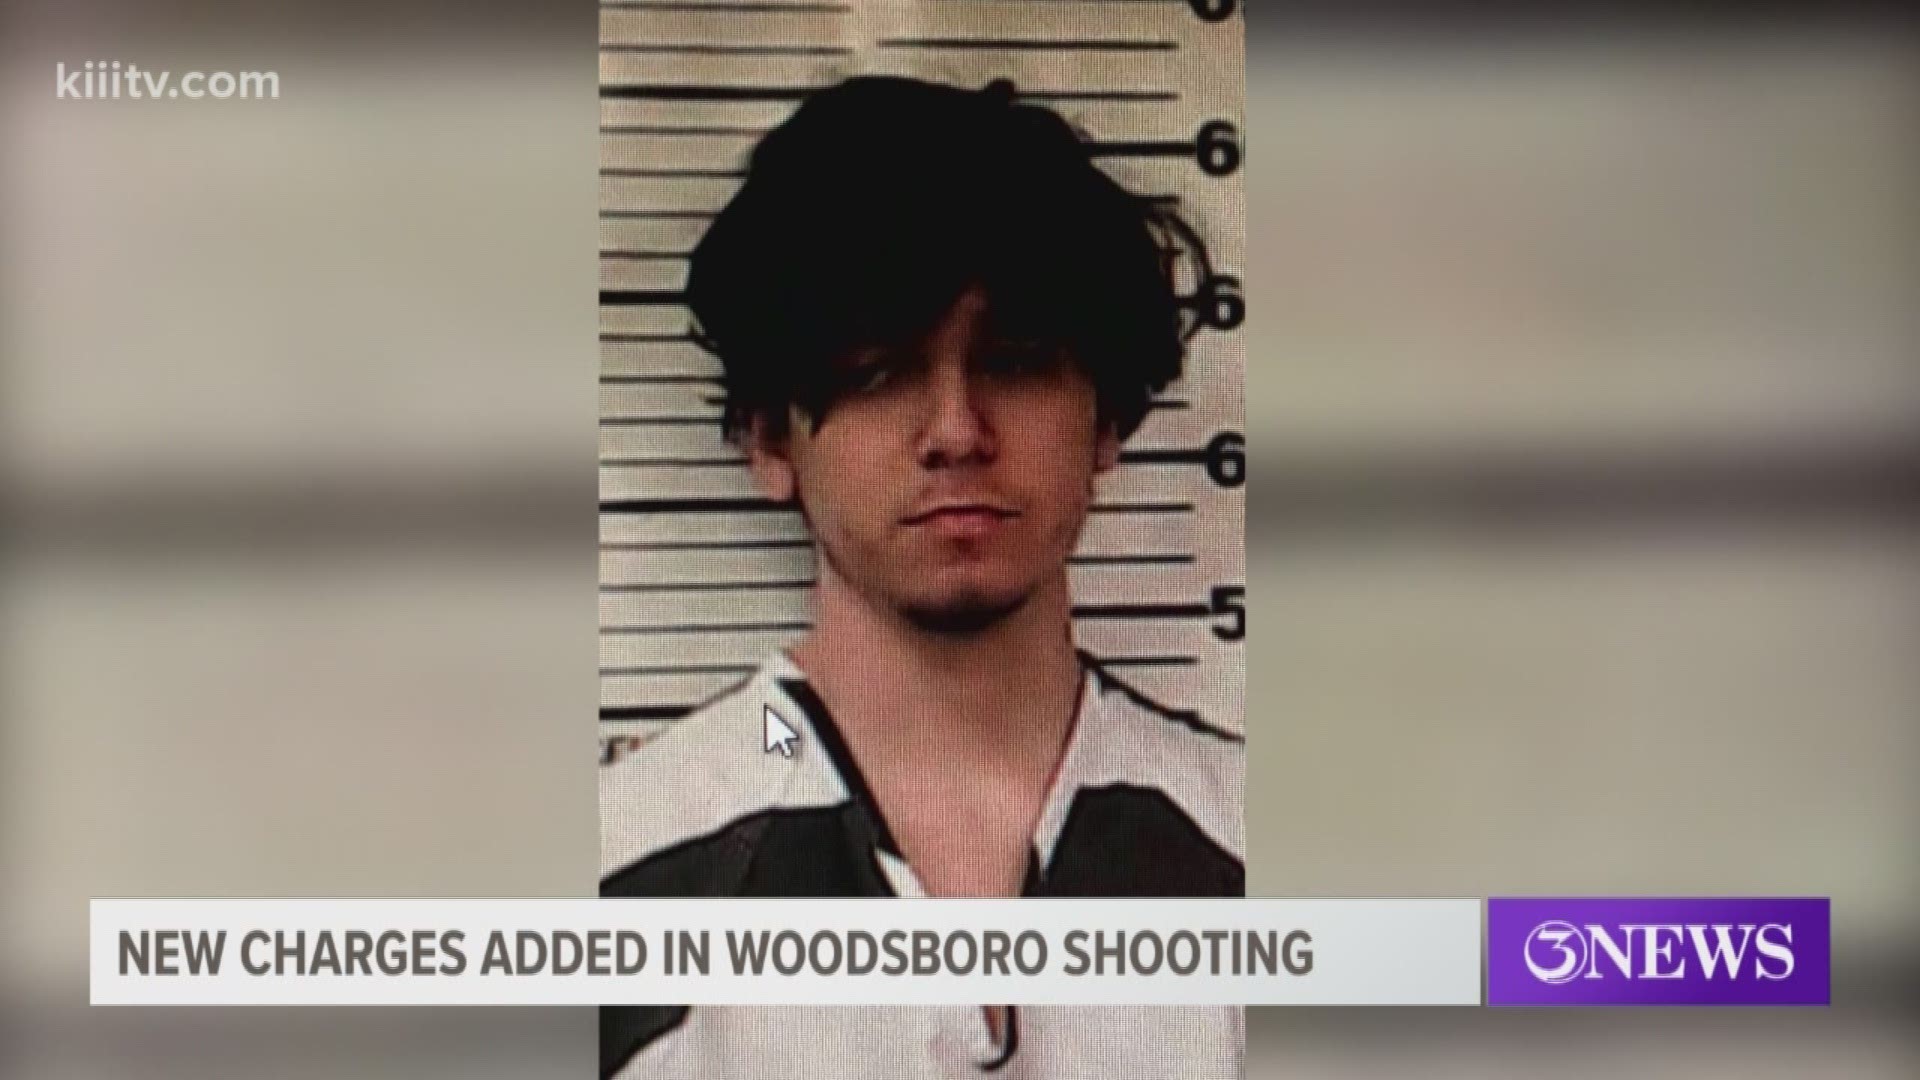 An 18-year-old accused in the shooting of a teen girl in Woodsboro, Texas, on Saturday, May 11, is now facing new charges.